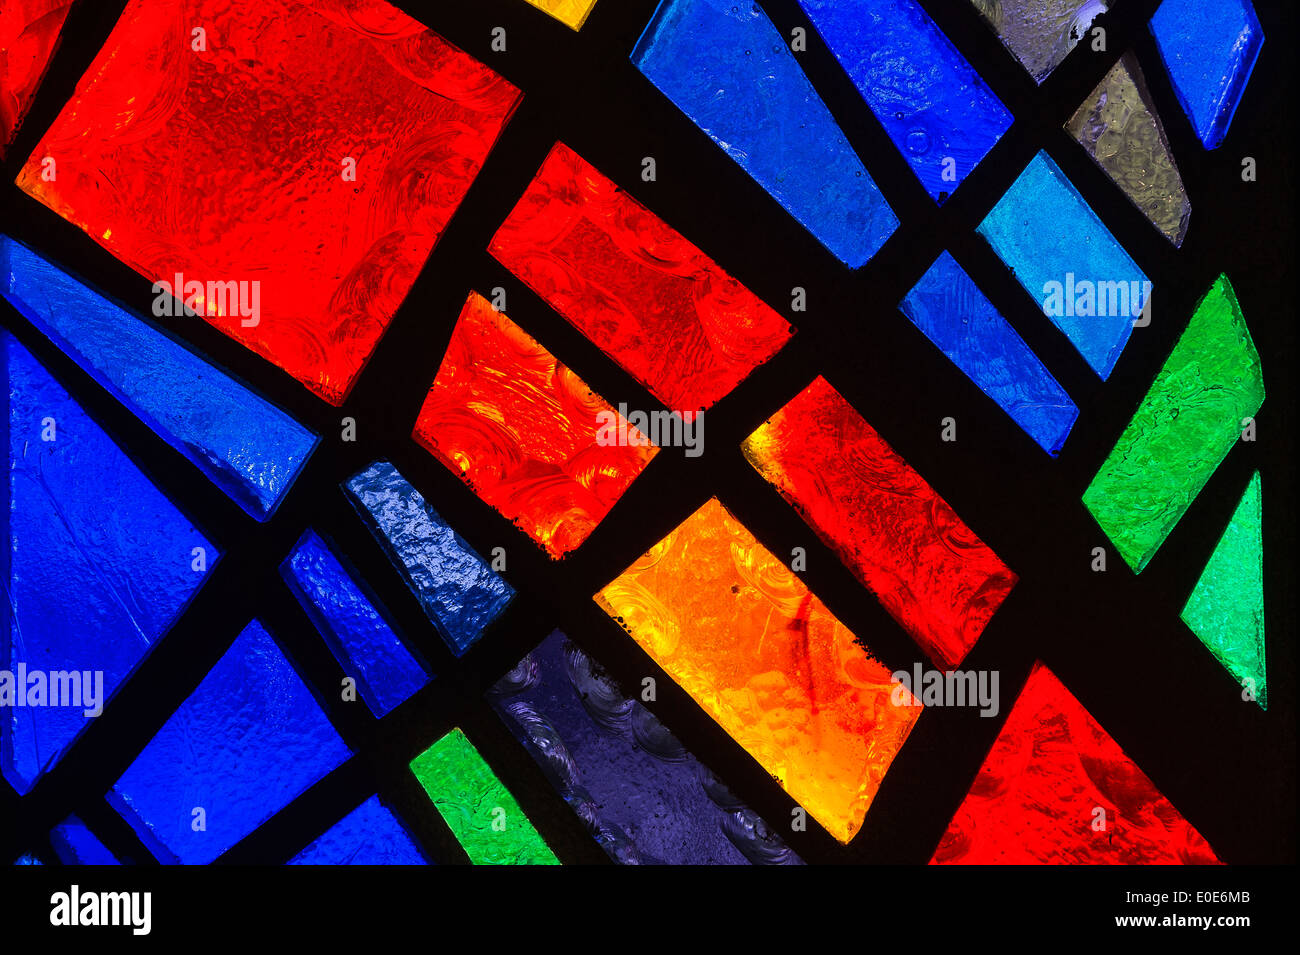 Stained glass detail. Stock Photo